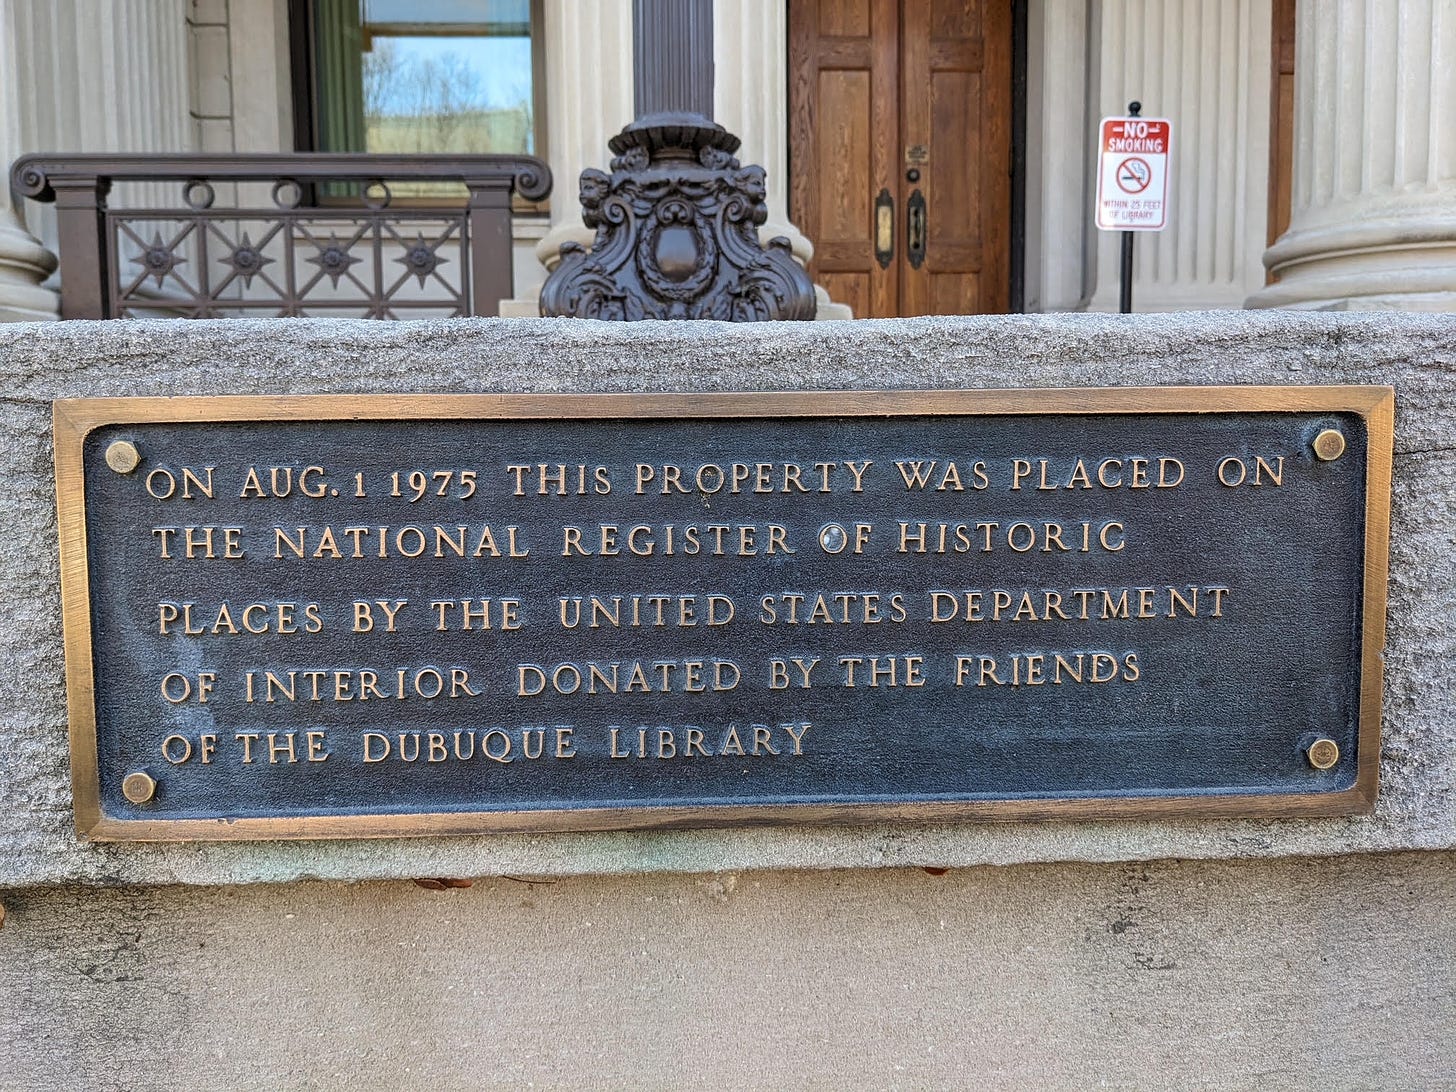 Image of the national register plaque outside of the dubuque public library in iowa.